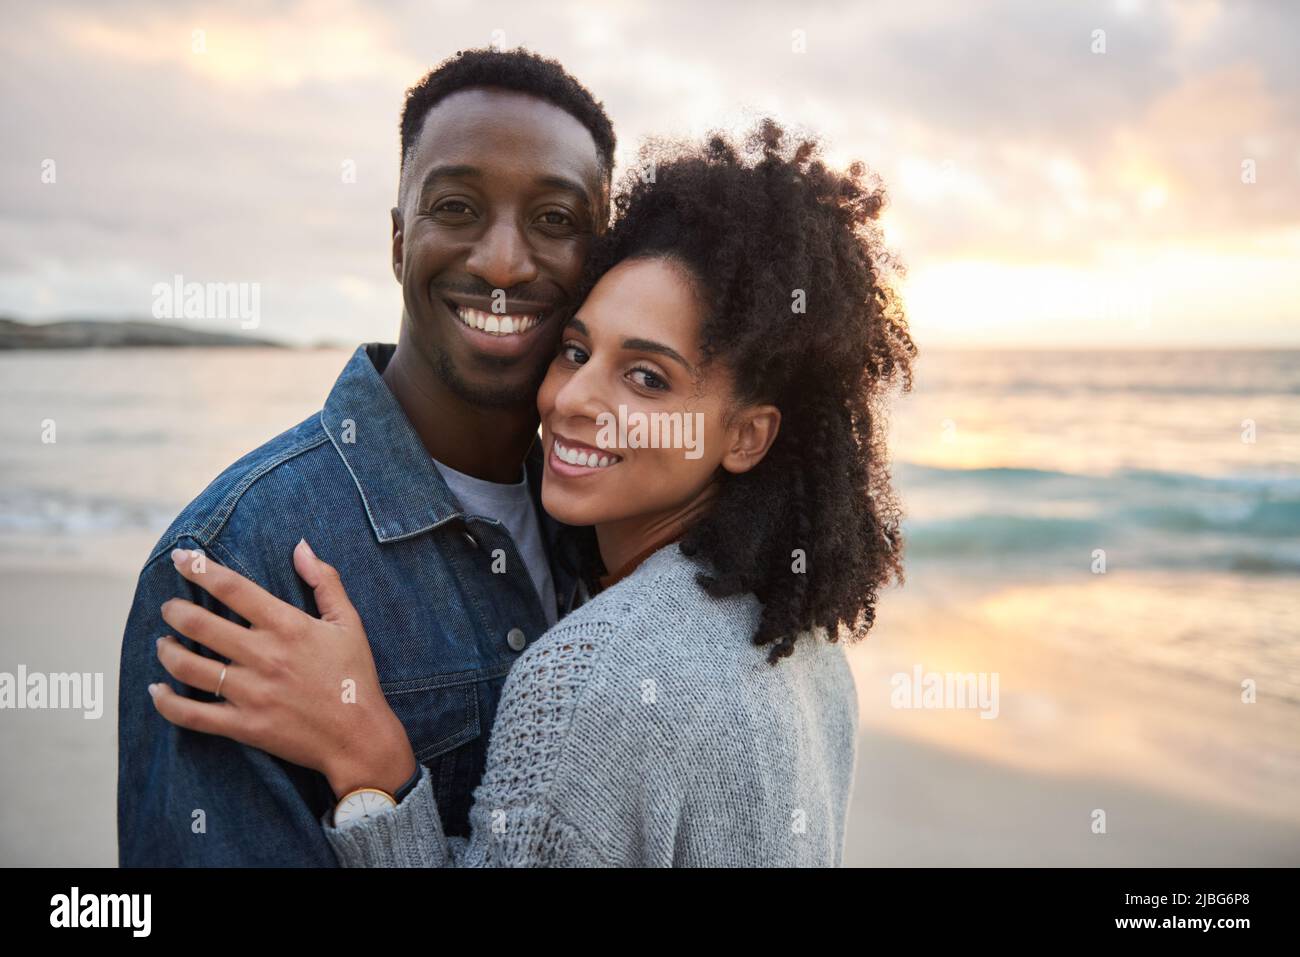 Smiling multiethnic couple standing arm in arm on a beach at sunset Stock Photo